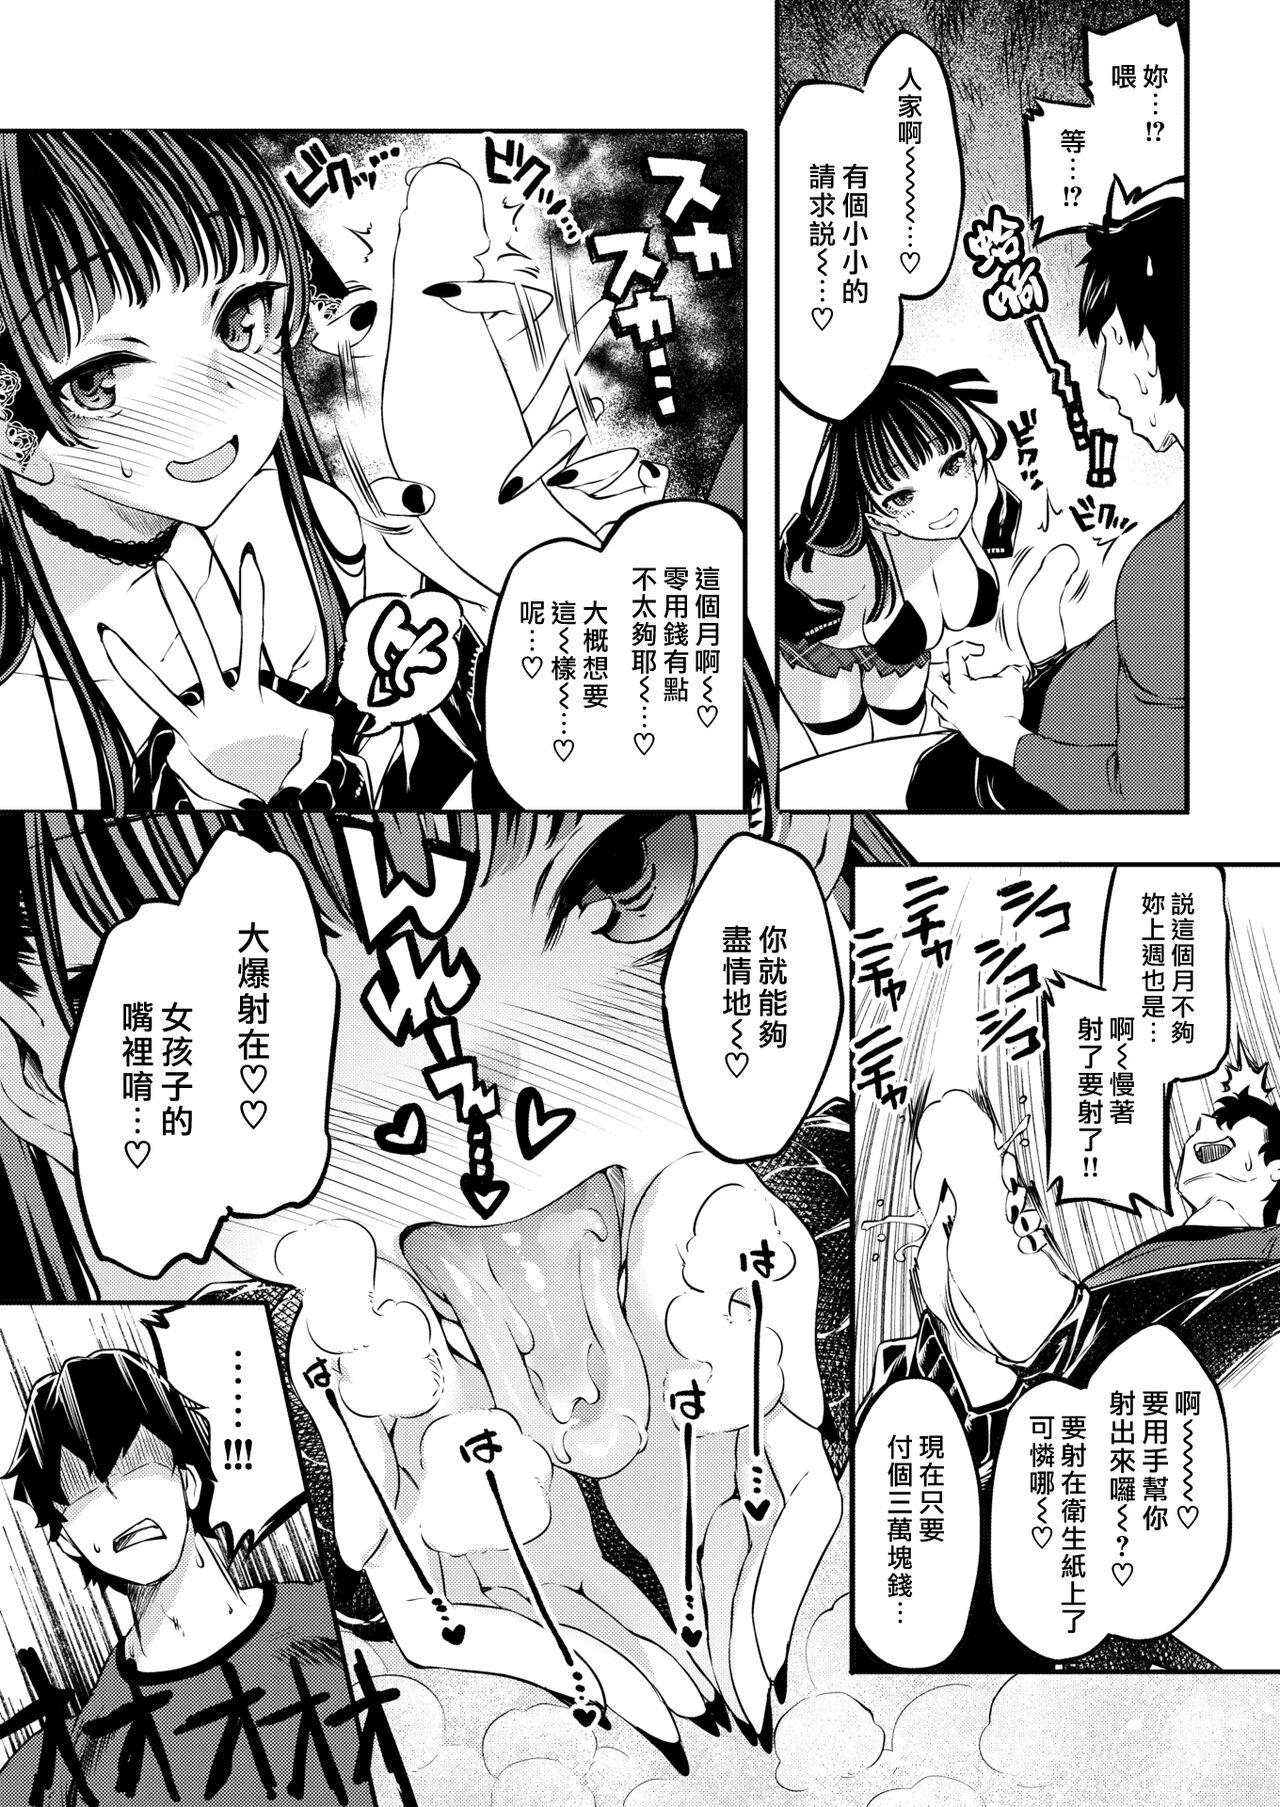 Whooty H Shitaino How much!! | 想色色的價碼!! Pounding - Page 4